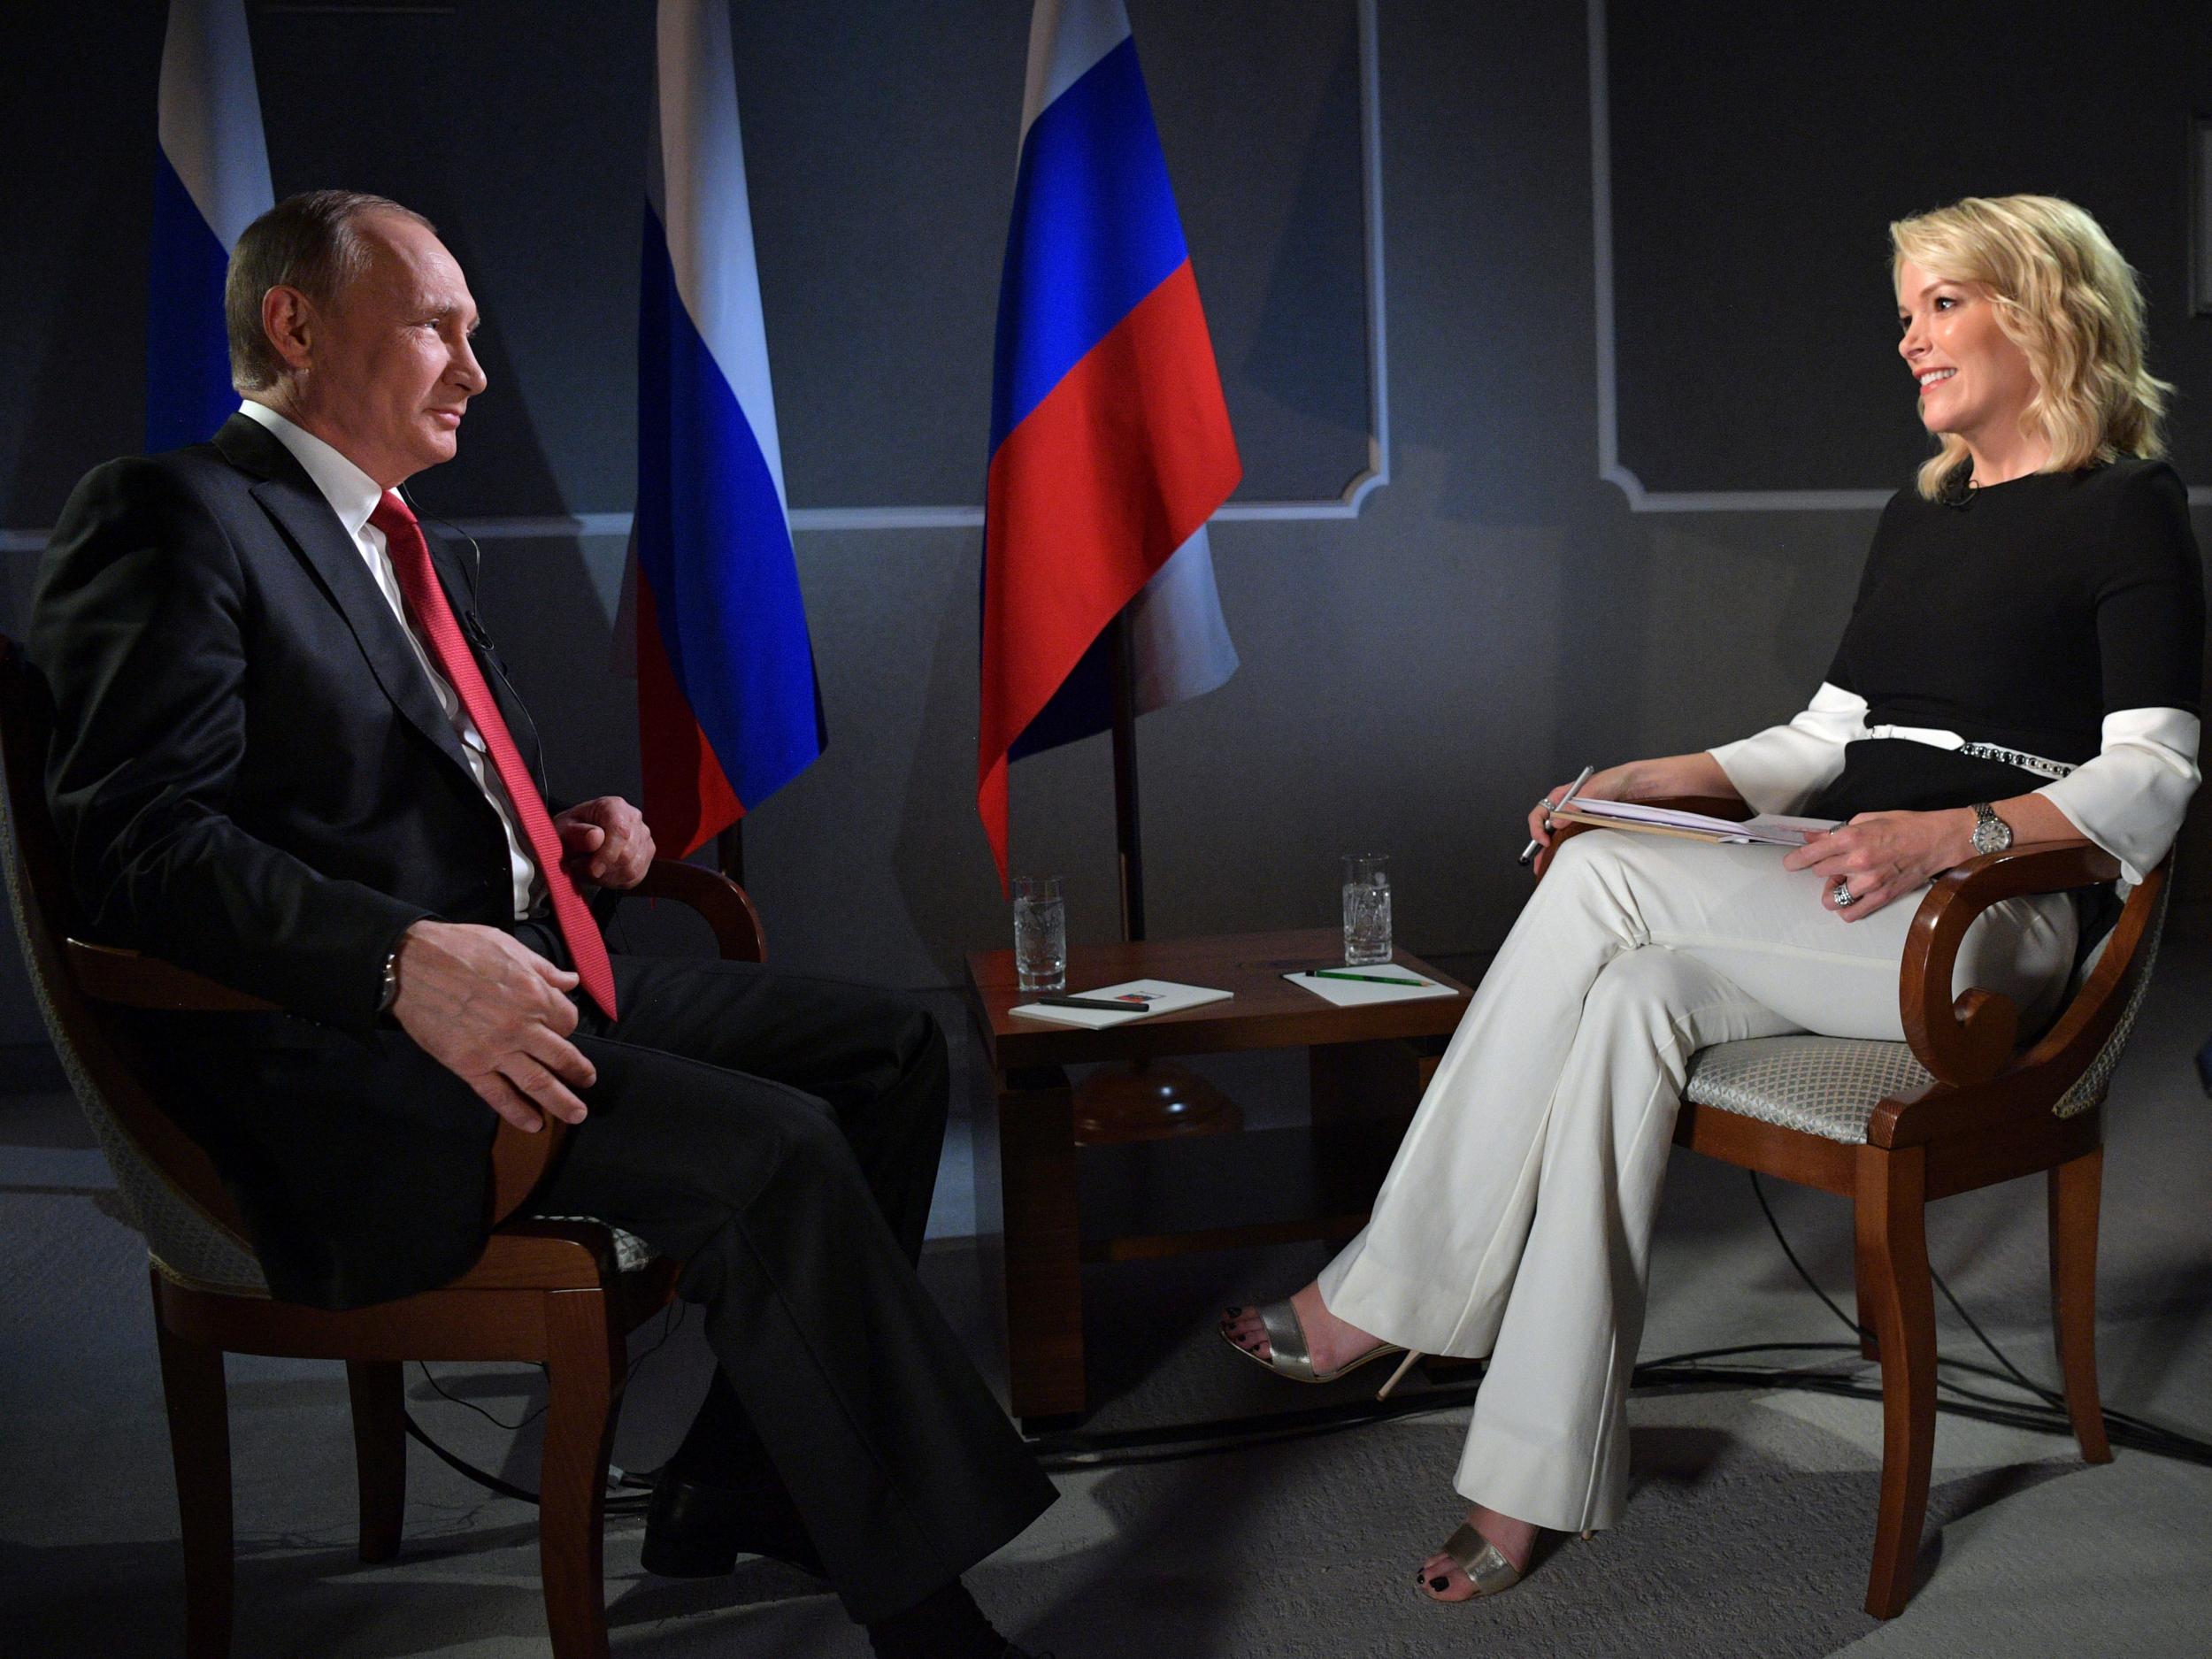 Russian President Vladimir Putin speaks with journalist Megyn Kelly during an interview on the sidelines of the St Petersburg International Economic Forum on 3 June 2017